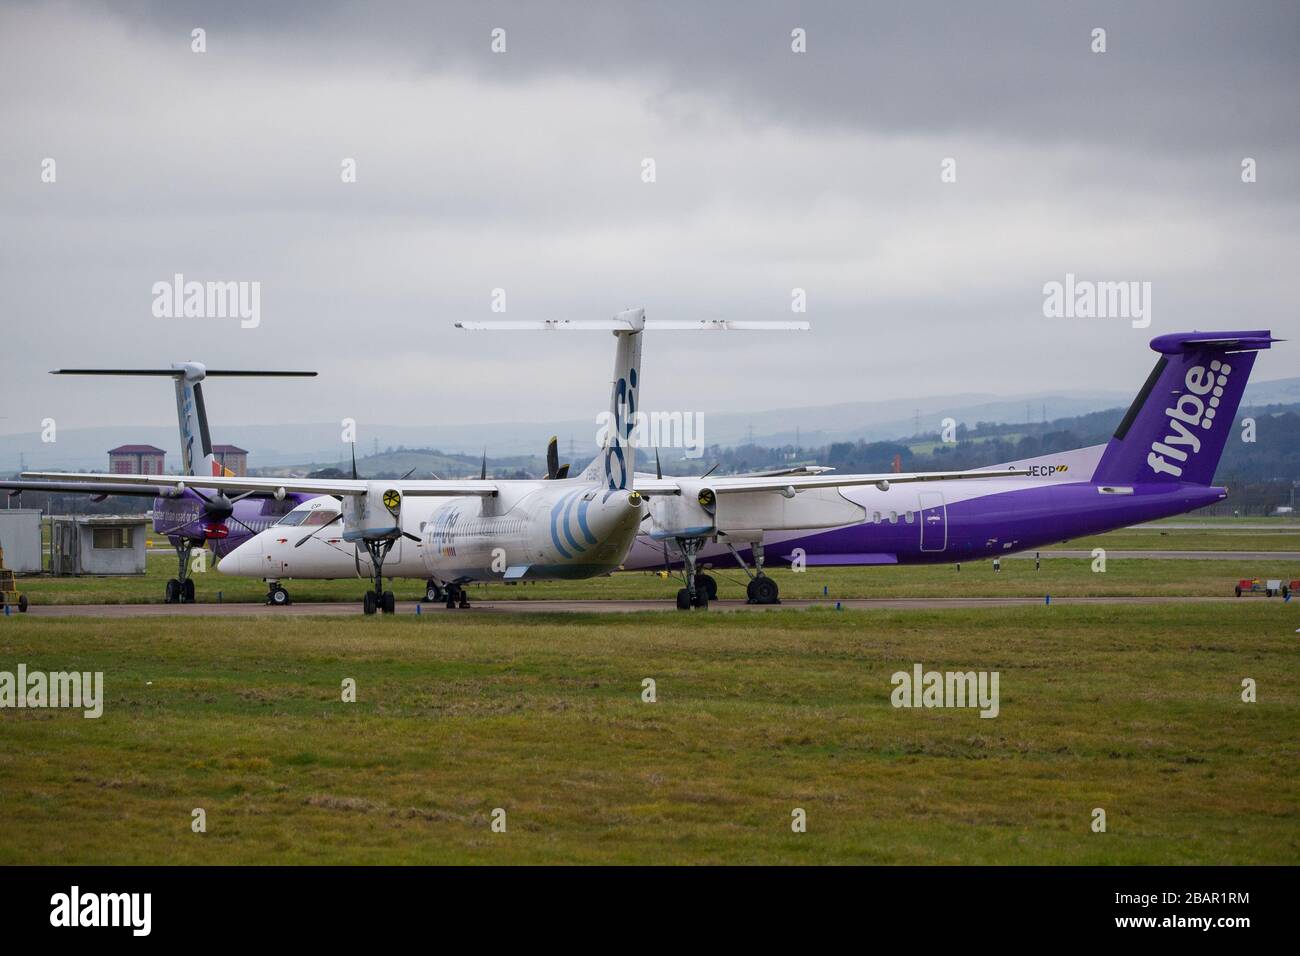 Glasgow, UK. 27 March 2020. Pictured: Grounded Flybe De Havilland Canada Dash 8 Q400 Aircraft seen parked up on the tarmac by the Emergency Rendezvous point at Glasgow Airport.  The Coronavirus Pandemic has been responsible for the UK shutdown aviation bringing Glasgow Airport to look more like a ghost town. Credit: Colin Fisher/Alamy Live News. Stock Photo